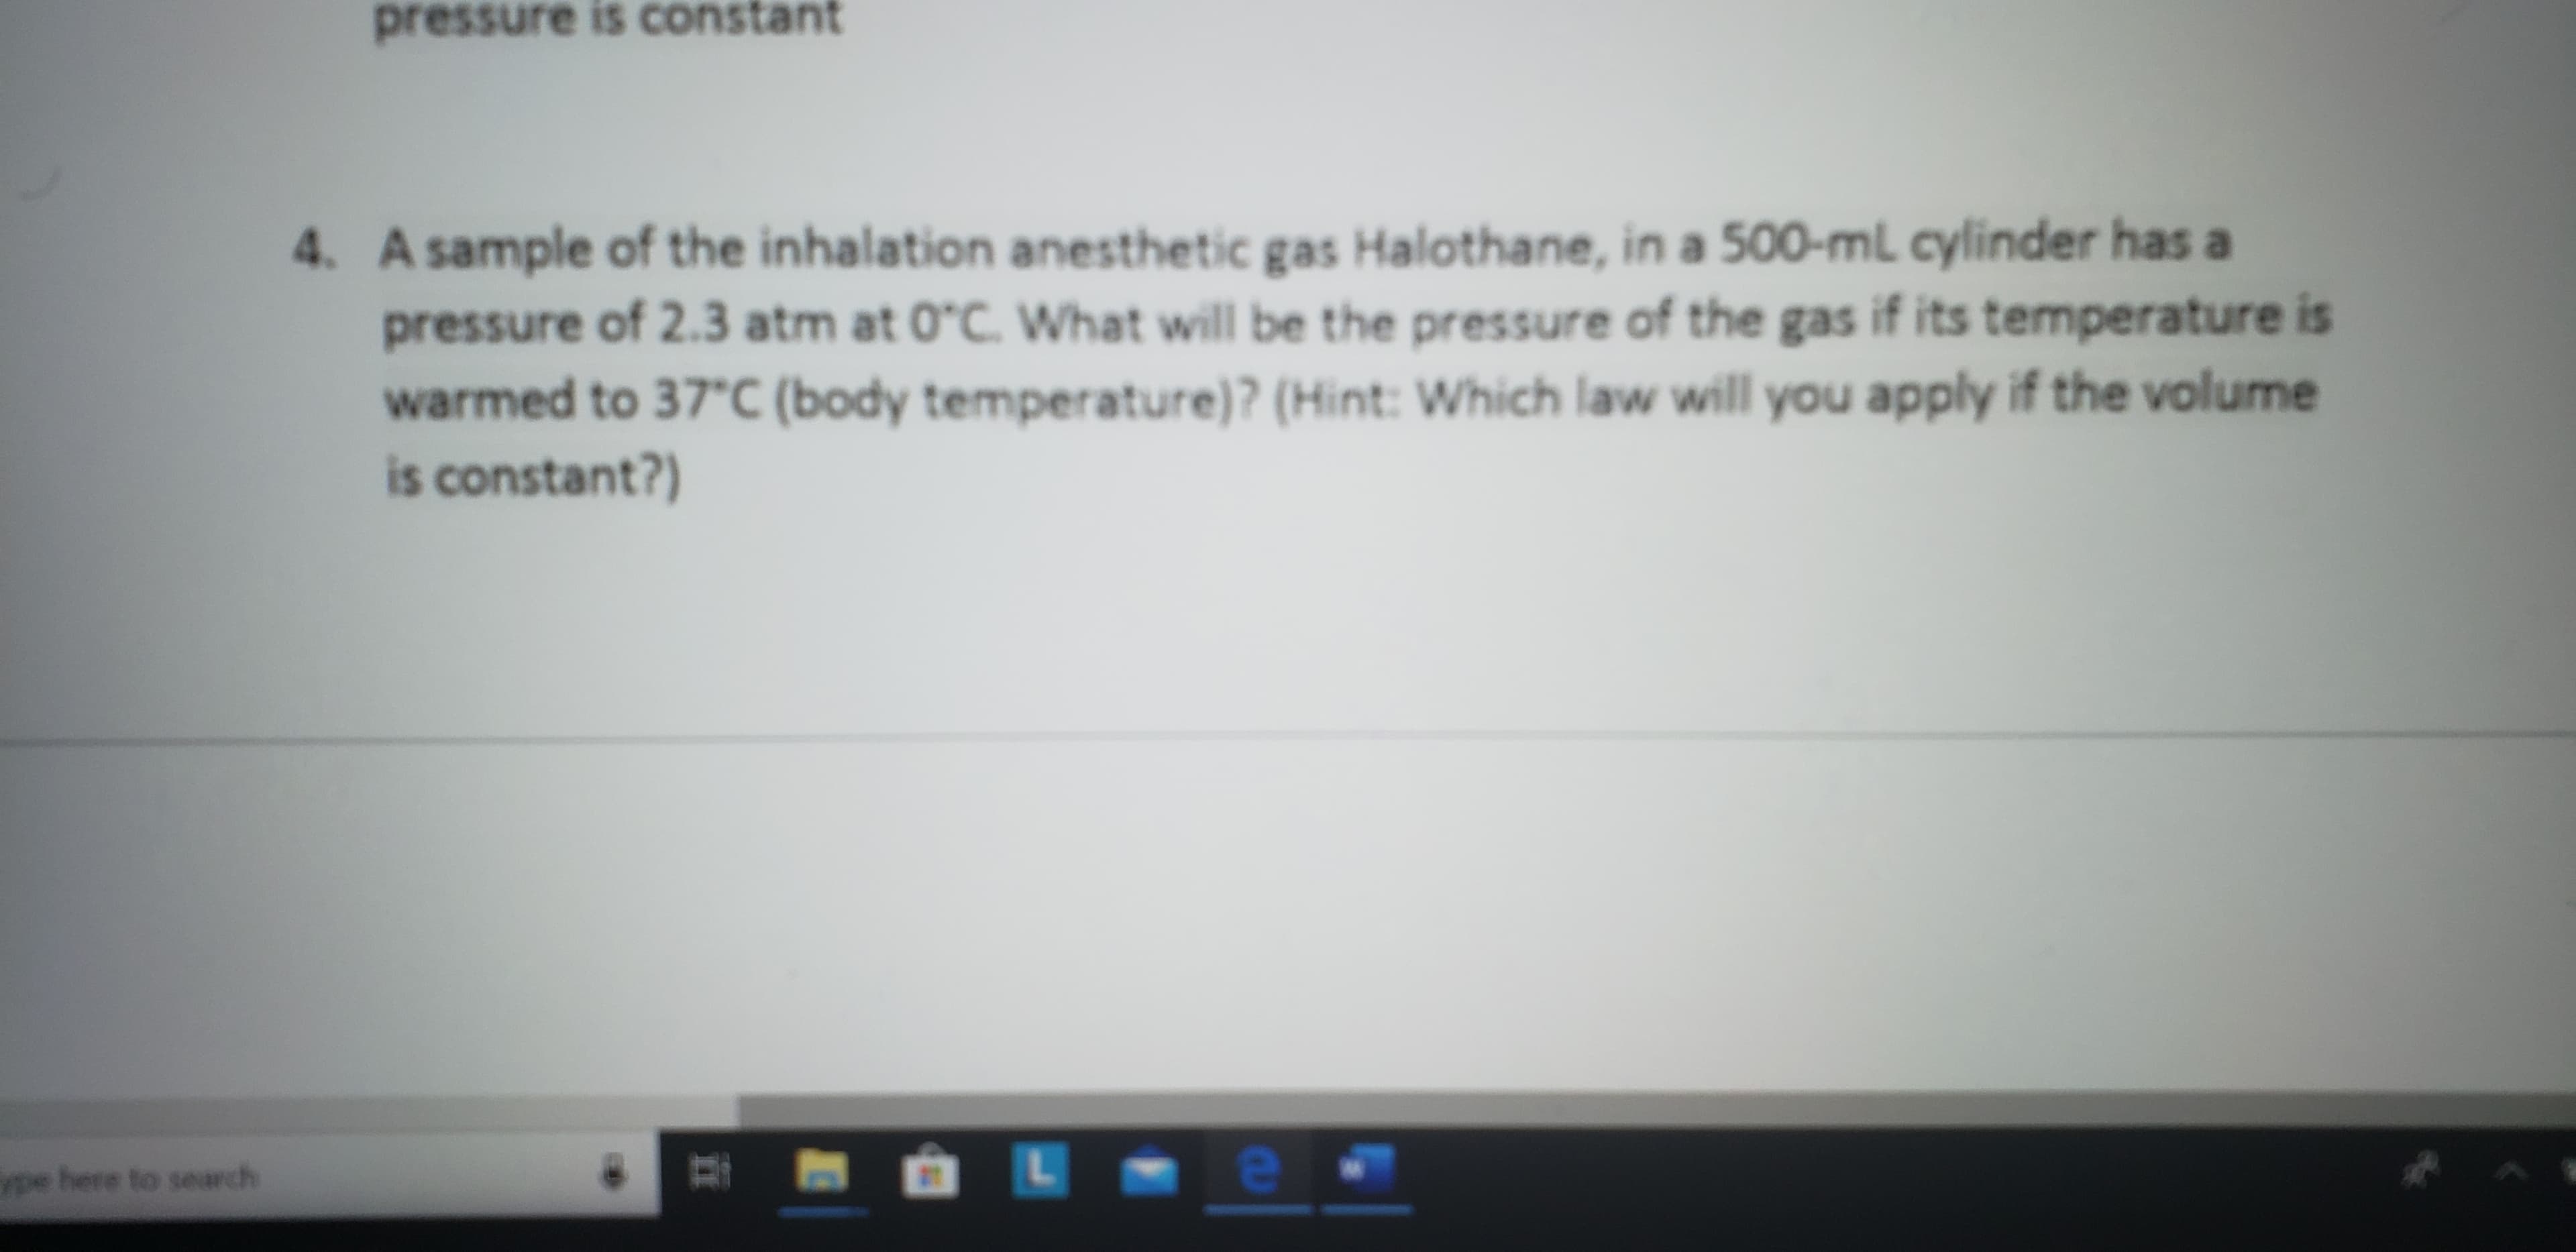 pressure is constant
4. A sample of the inhalation anesthetic gas Halothane, in a 500-ml cylinder has a
pressure of 2.3 atm at 0°C. Wwhat will be the pressure of the gas if its temperature is
warmed to 37*C (body temperature)? (Hint: Which law will you apply if the volume
is constant?)
ype here to search
